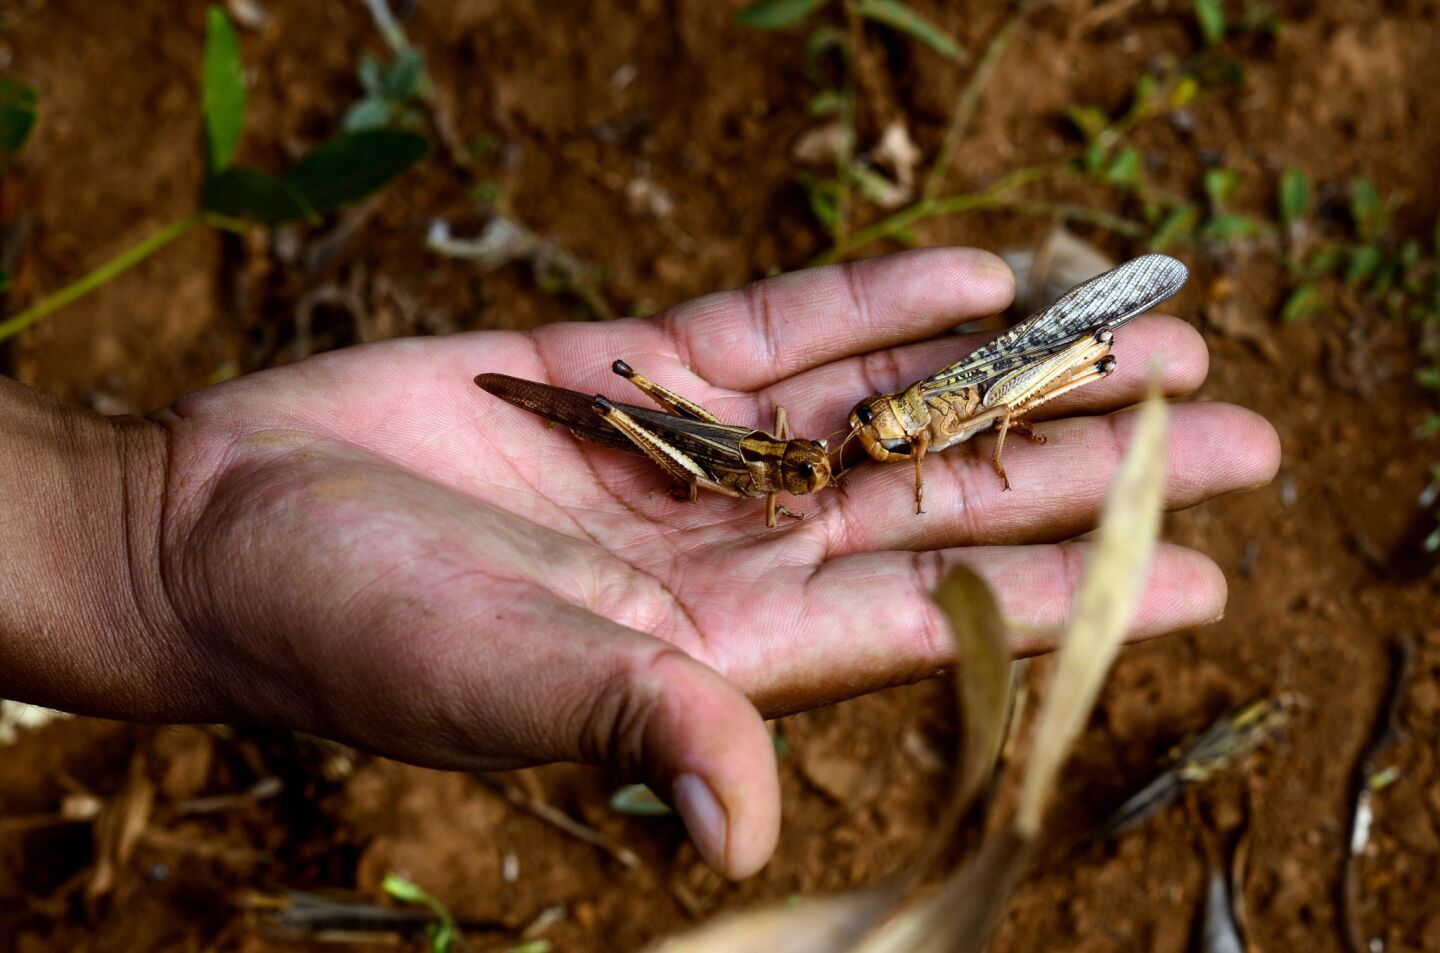 In April officials in Madagascar counted 100 swarms of locusts totaling 500 billion insects.